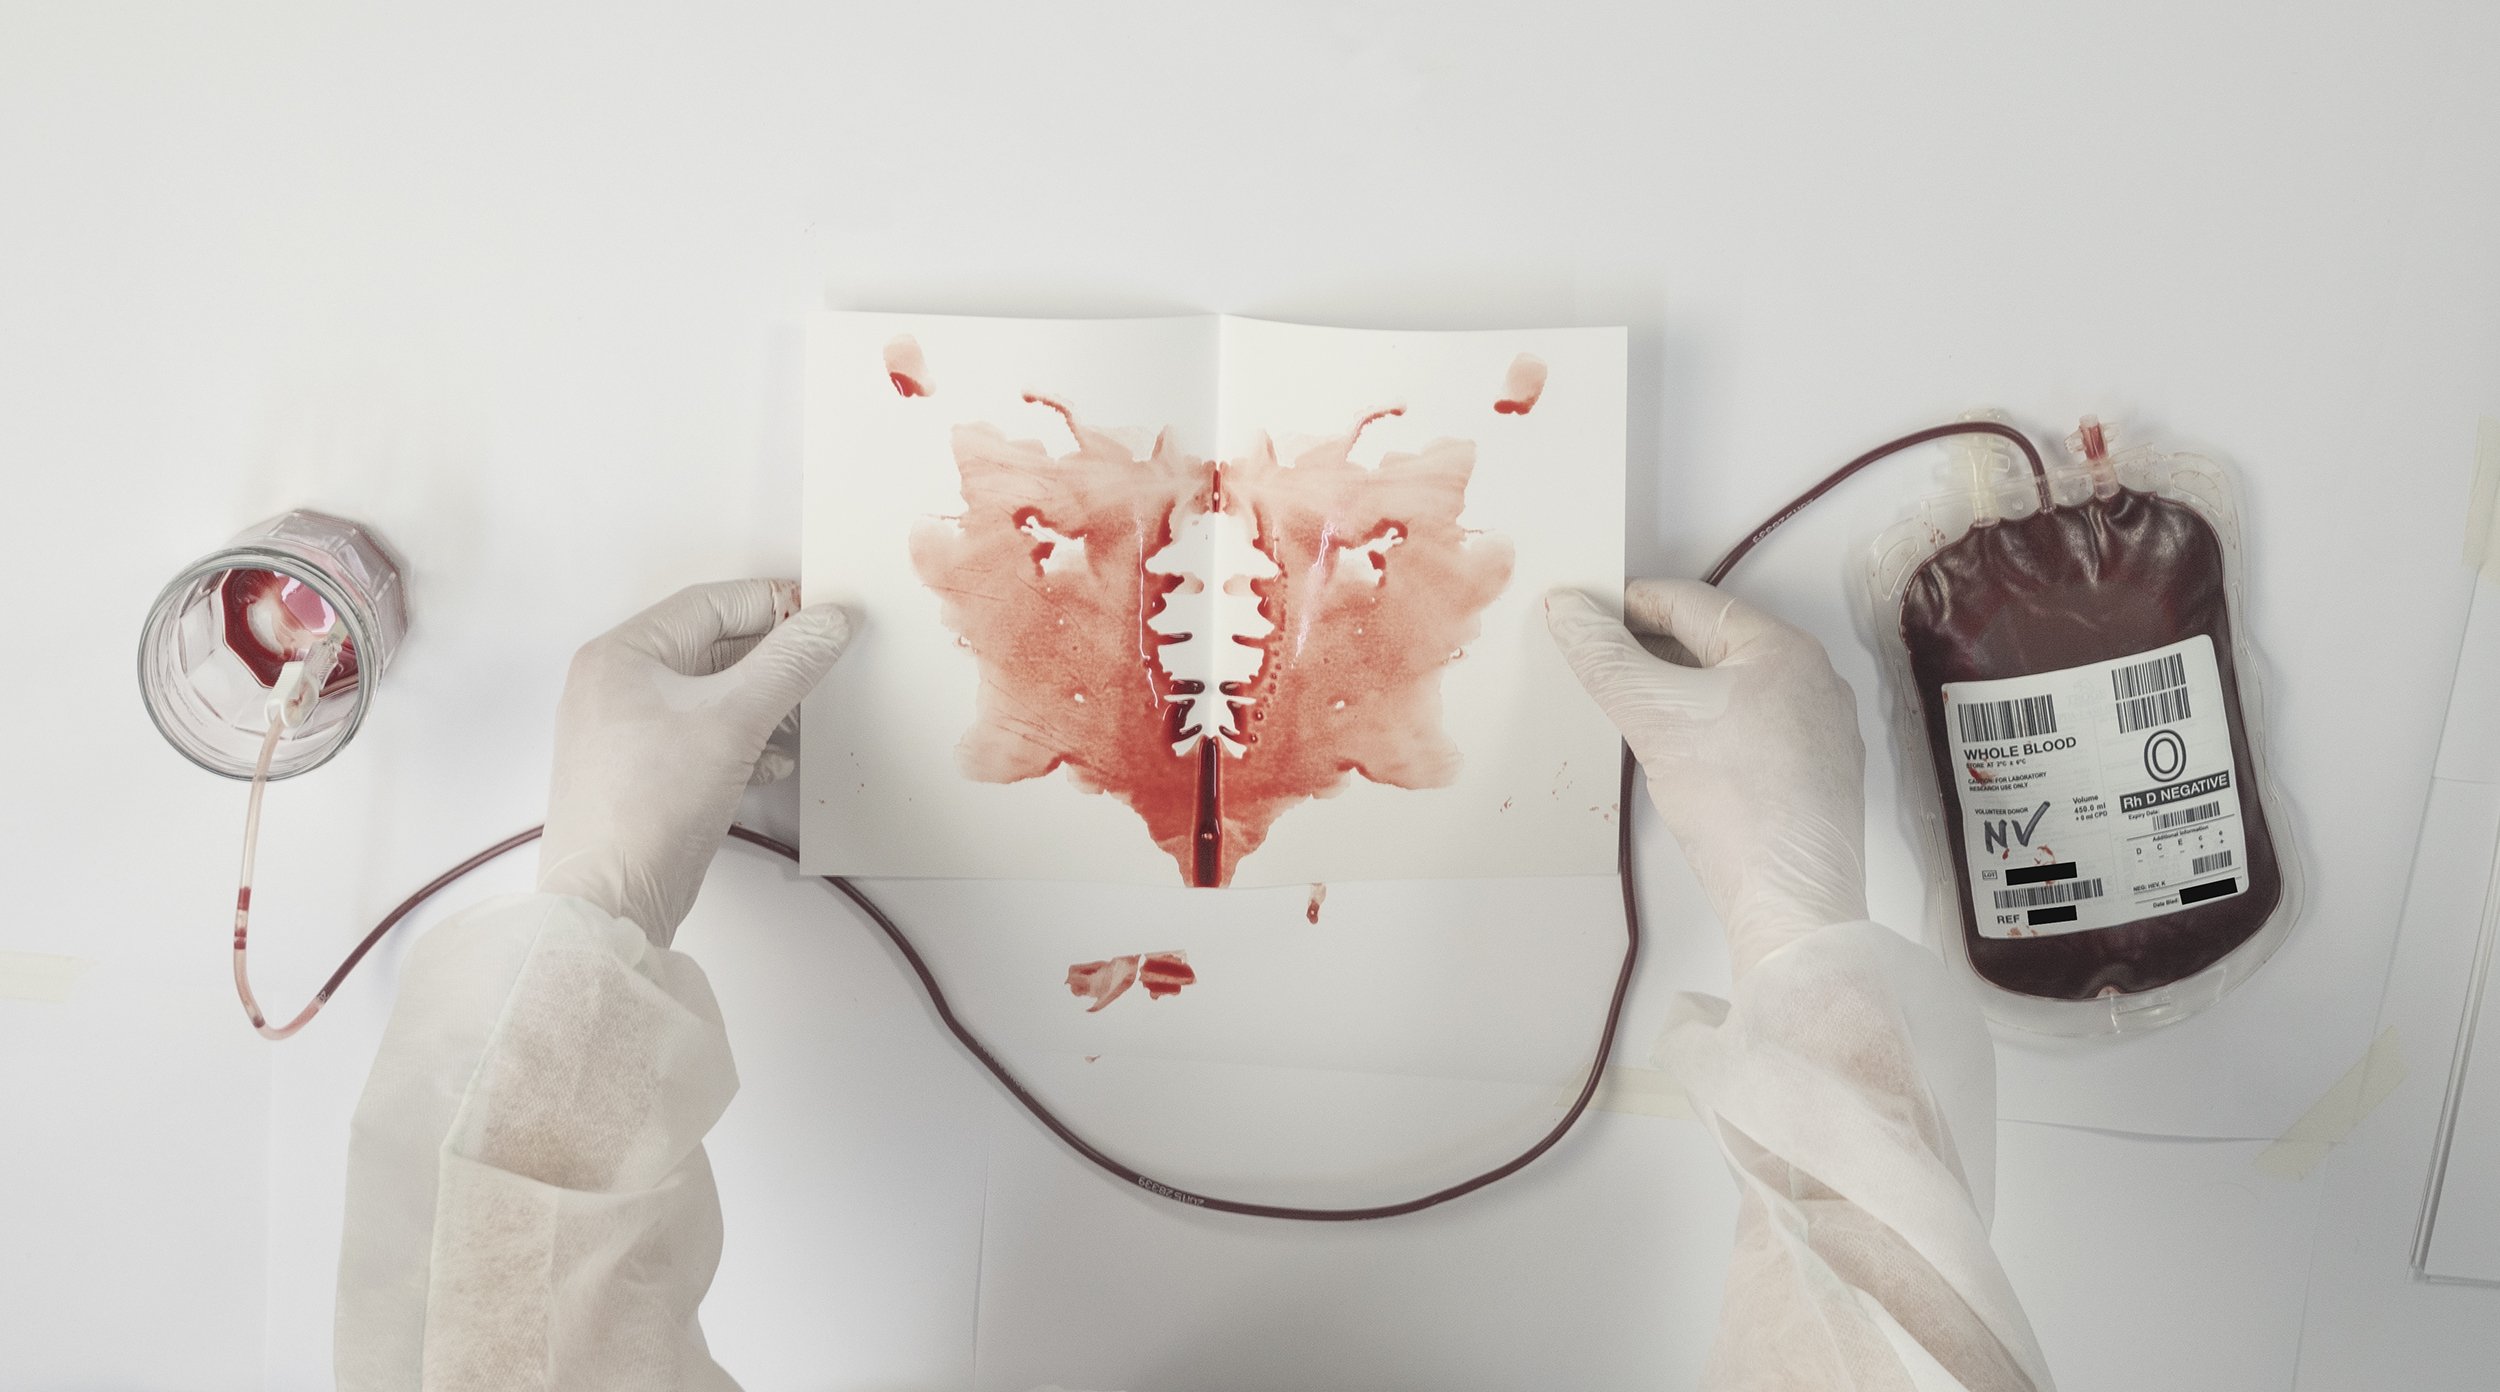 In Anxiety we Trust - by artist Diddo | Rorschach cards made with human blood | art | prints